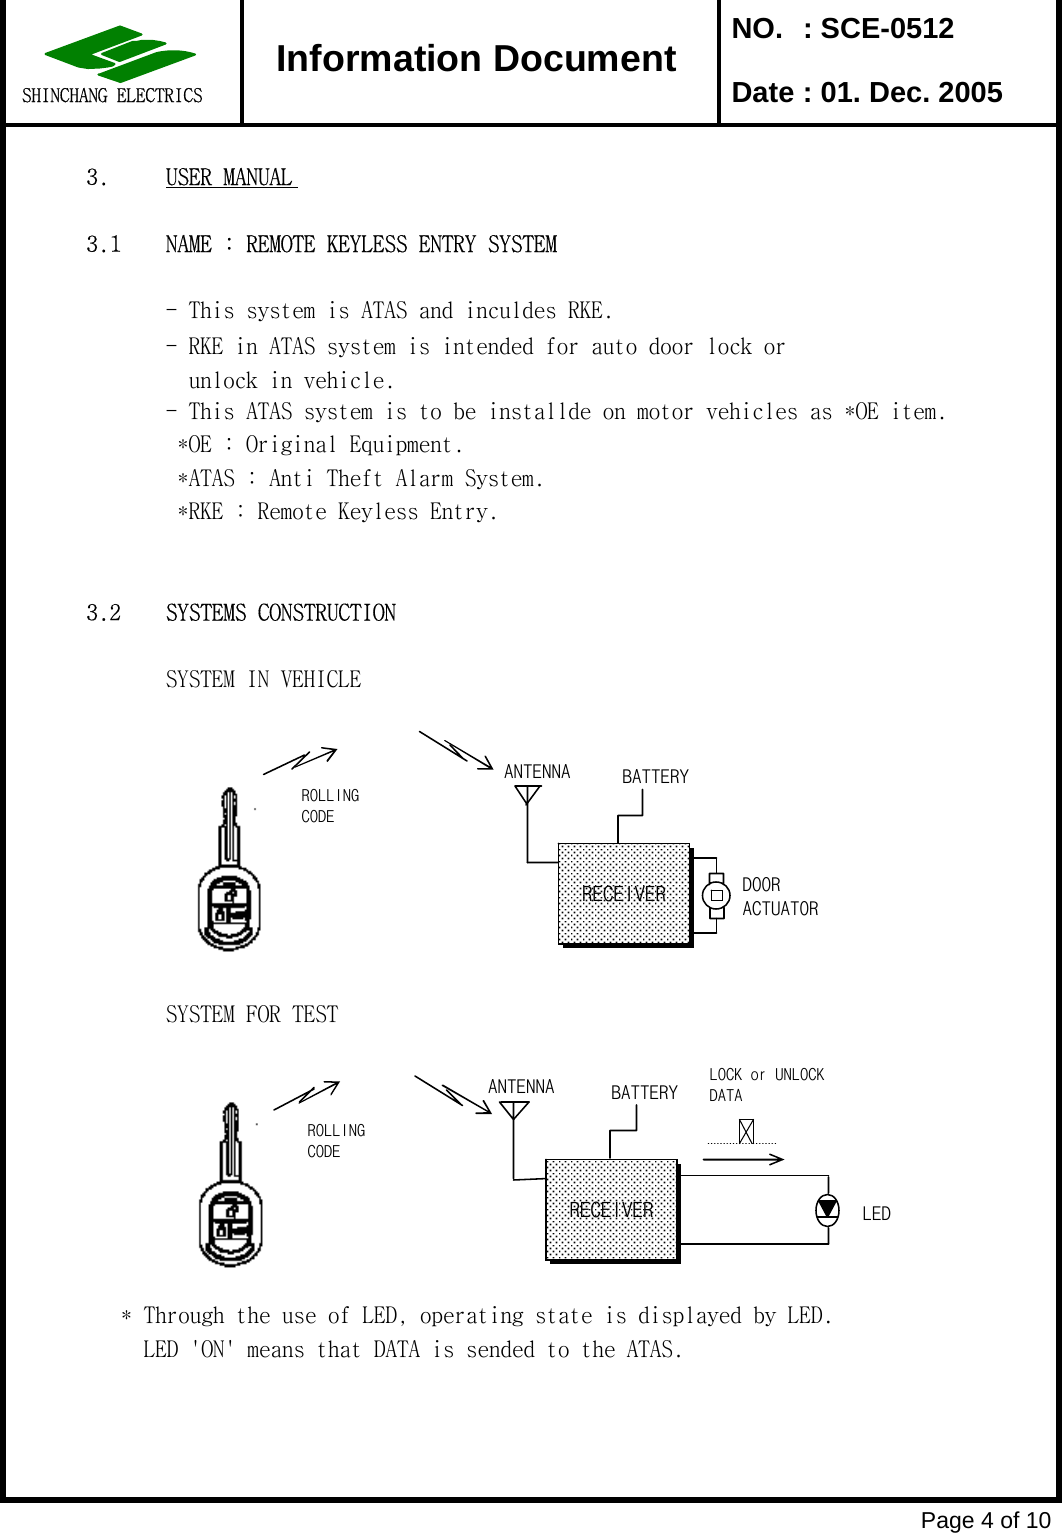  NO. : SCE-0512 Date : 01. Dec. 20053. USER MANUAL3.1 NAME : REMOTE KEYLESS ENTRY SYSTEM- This system is ATAS and inculdes RKE.  - RKE in ATAS system is intended for auto door lock or   unlock in vehicle. - This ATAS system is to be installde on motor vehicles as *OE item. *OE : Original Equipment. *ATAS : Anti Theft Alarm System. *RKE : Remote Keyless Entry.3.2 SYSTEMS CONSTRUCTIONSYSTEM IN VEHICLESYSTEM FOR TEST   * Through the use of LED, operating state is displayed by LED.     LED &apos;ON&apos; means that DATA is sended to the ATAS. Page 4 of 10Information DocumentSHINCHANG ELECTRICSROLLINGCODEANTENNA BATTERYDOORACTUATORROLLINGCODEANTENNARECEIVERBATTERYLEDRECEIVERLOCK or UNLOCKDATA